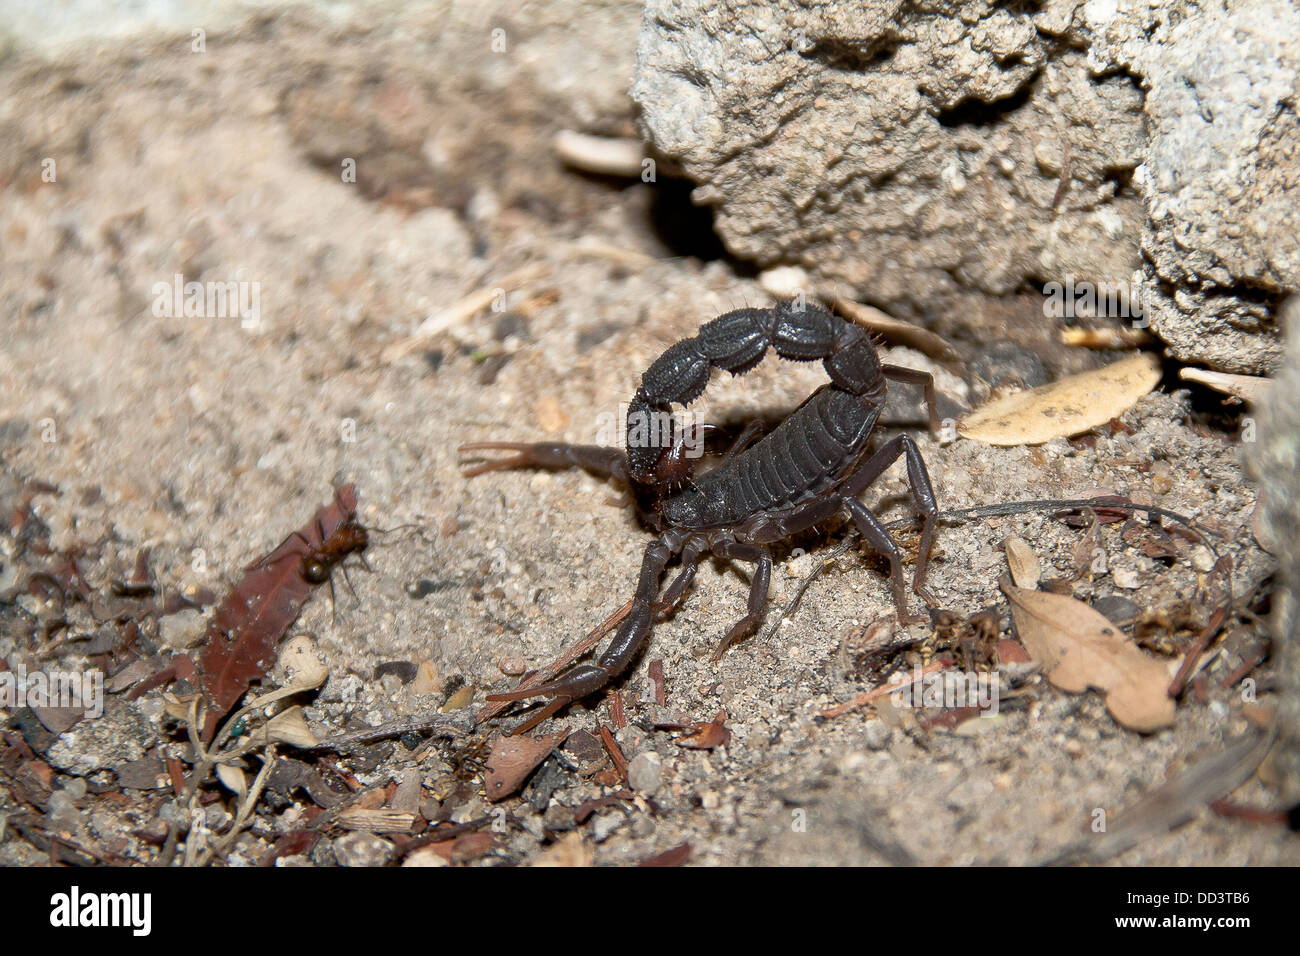 Fat-tailed scorpion in South Africa Stock Photo